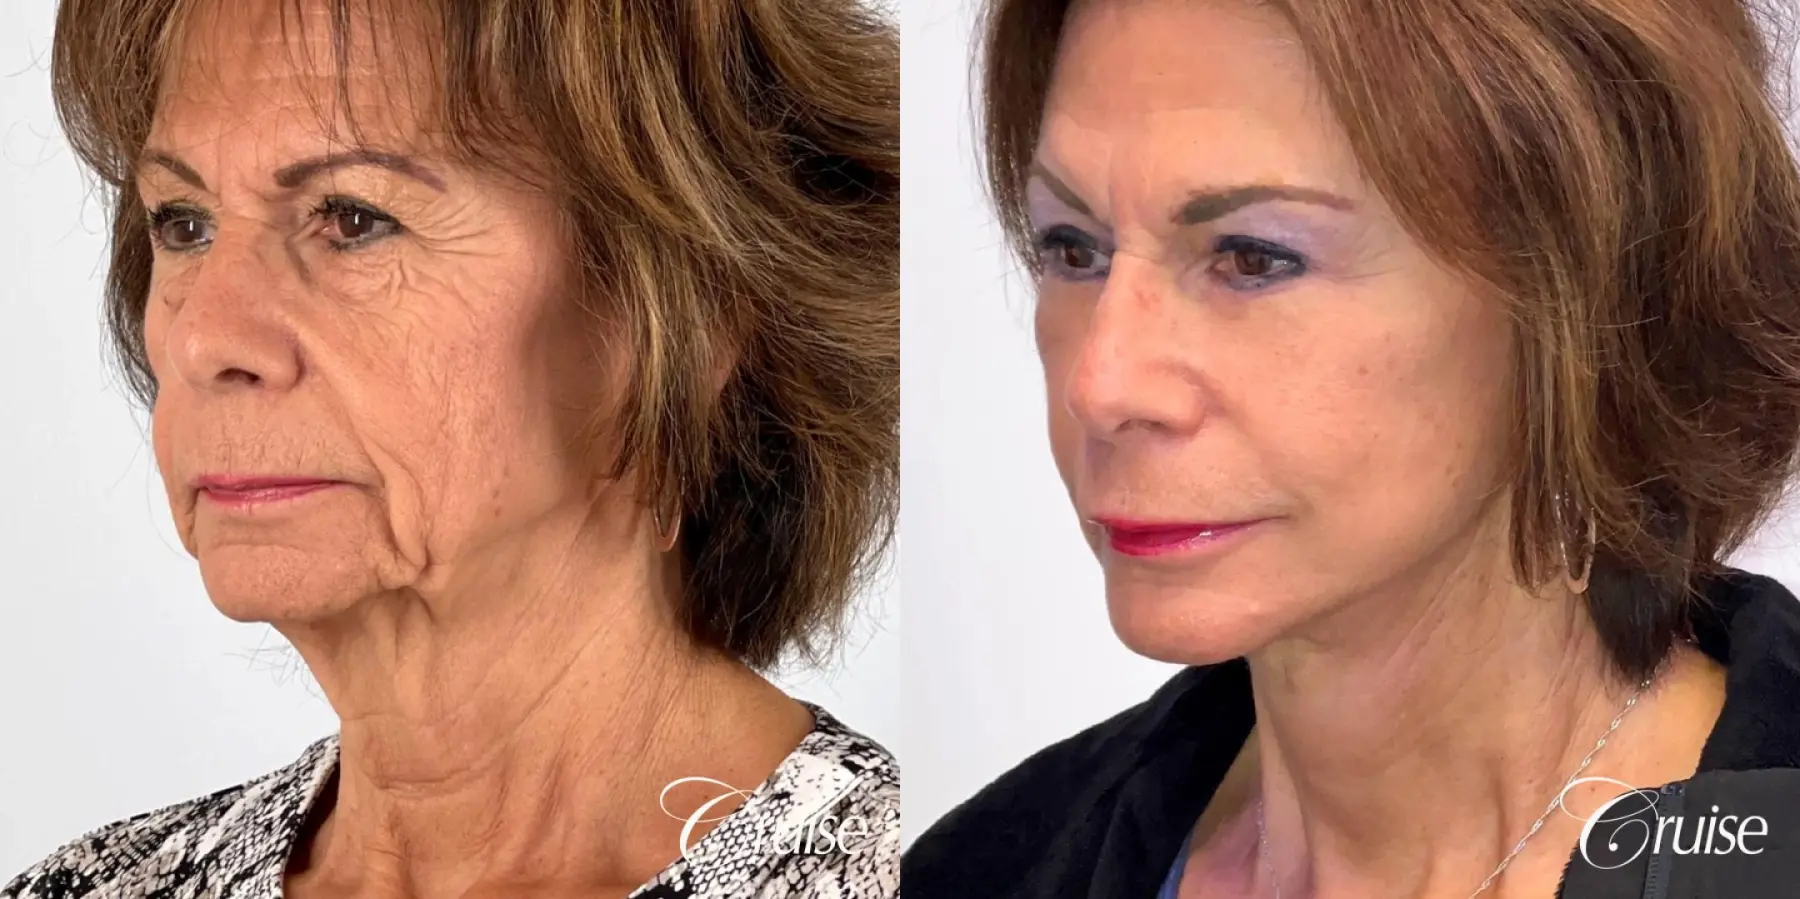 Face & Neck Lift & Rejuvenation - Before and After 2